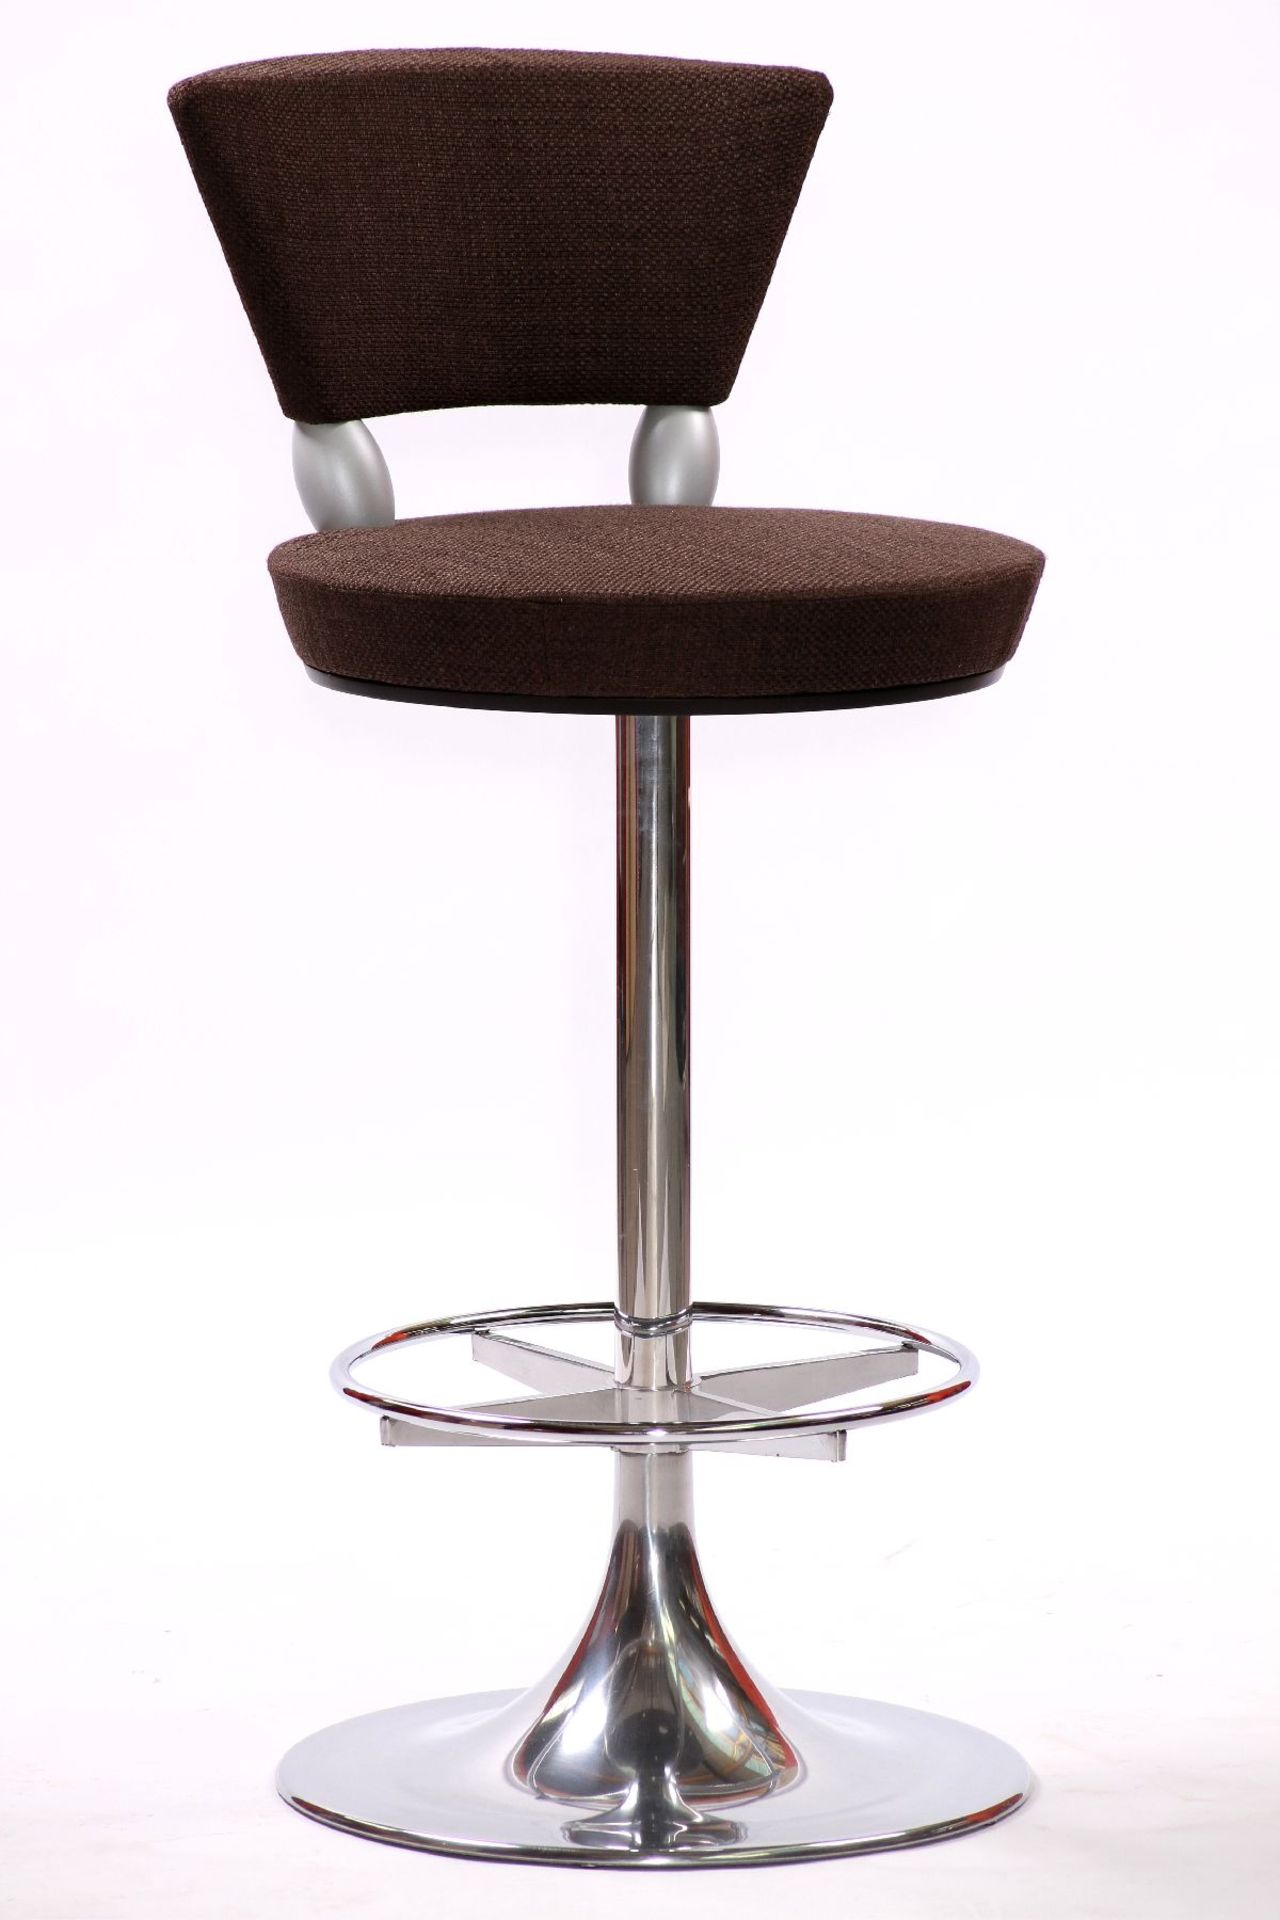 2 Barstools "Giorgetti", made in Italy, Design: Lèon Krier, foot chromed steel, rotating seat with - Bild 2 aus 3